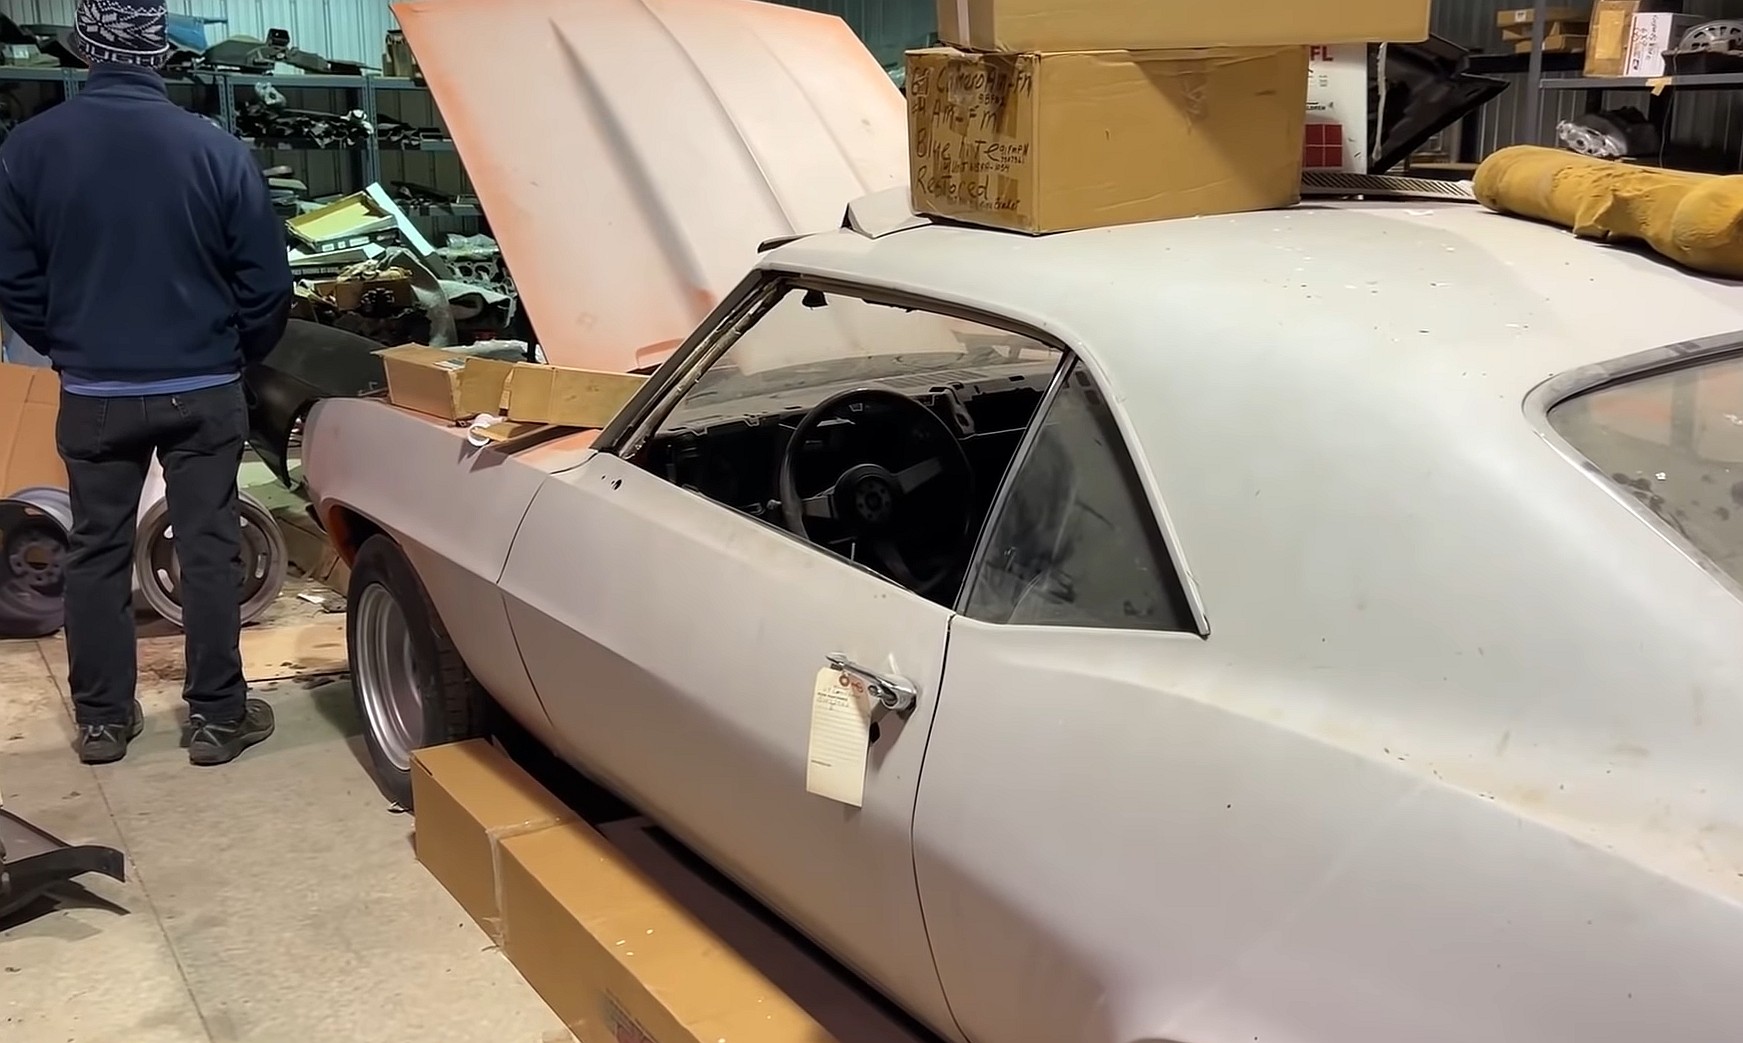 epic barn find includes 39 chevrolet camaro and chevelle classics a few rare ones too 1